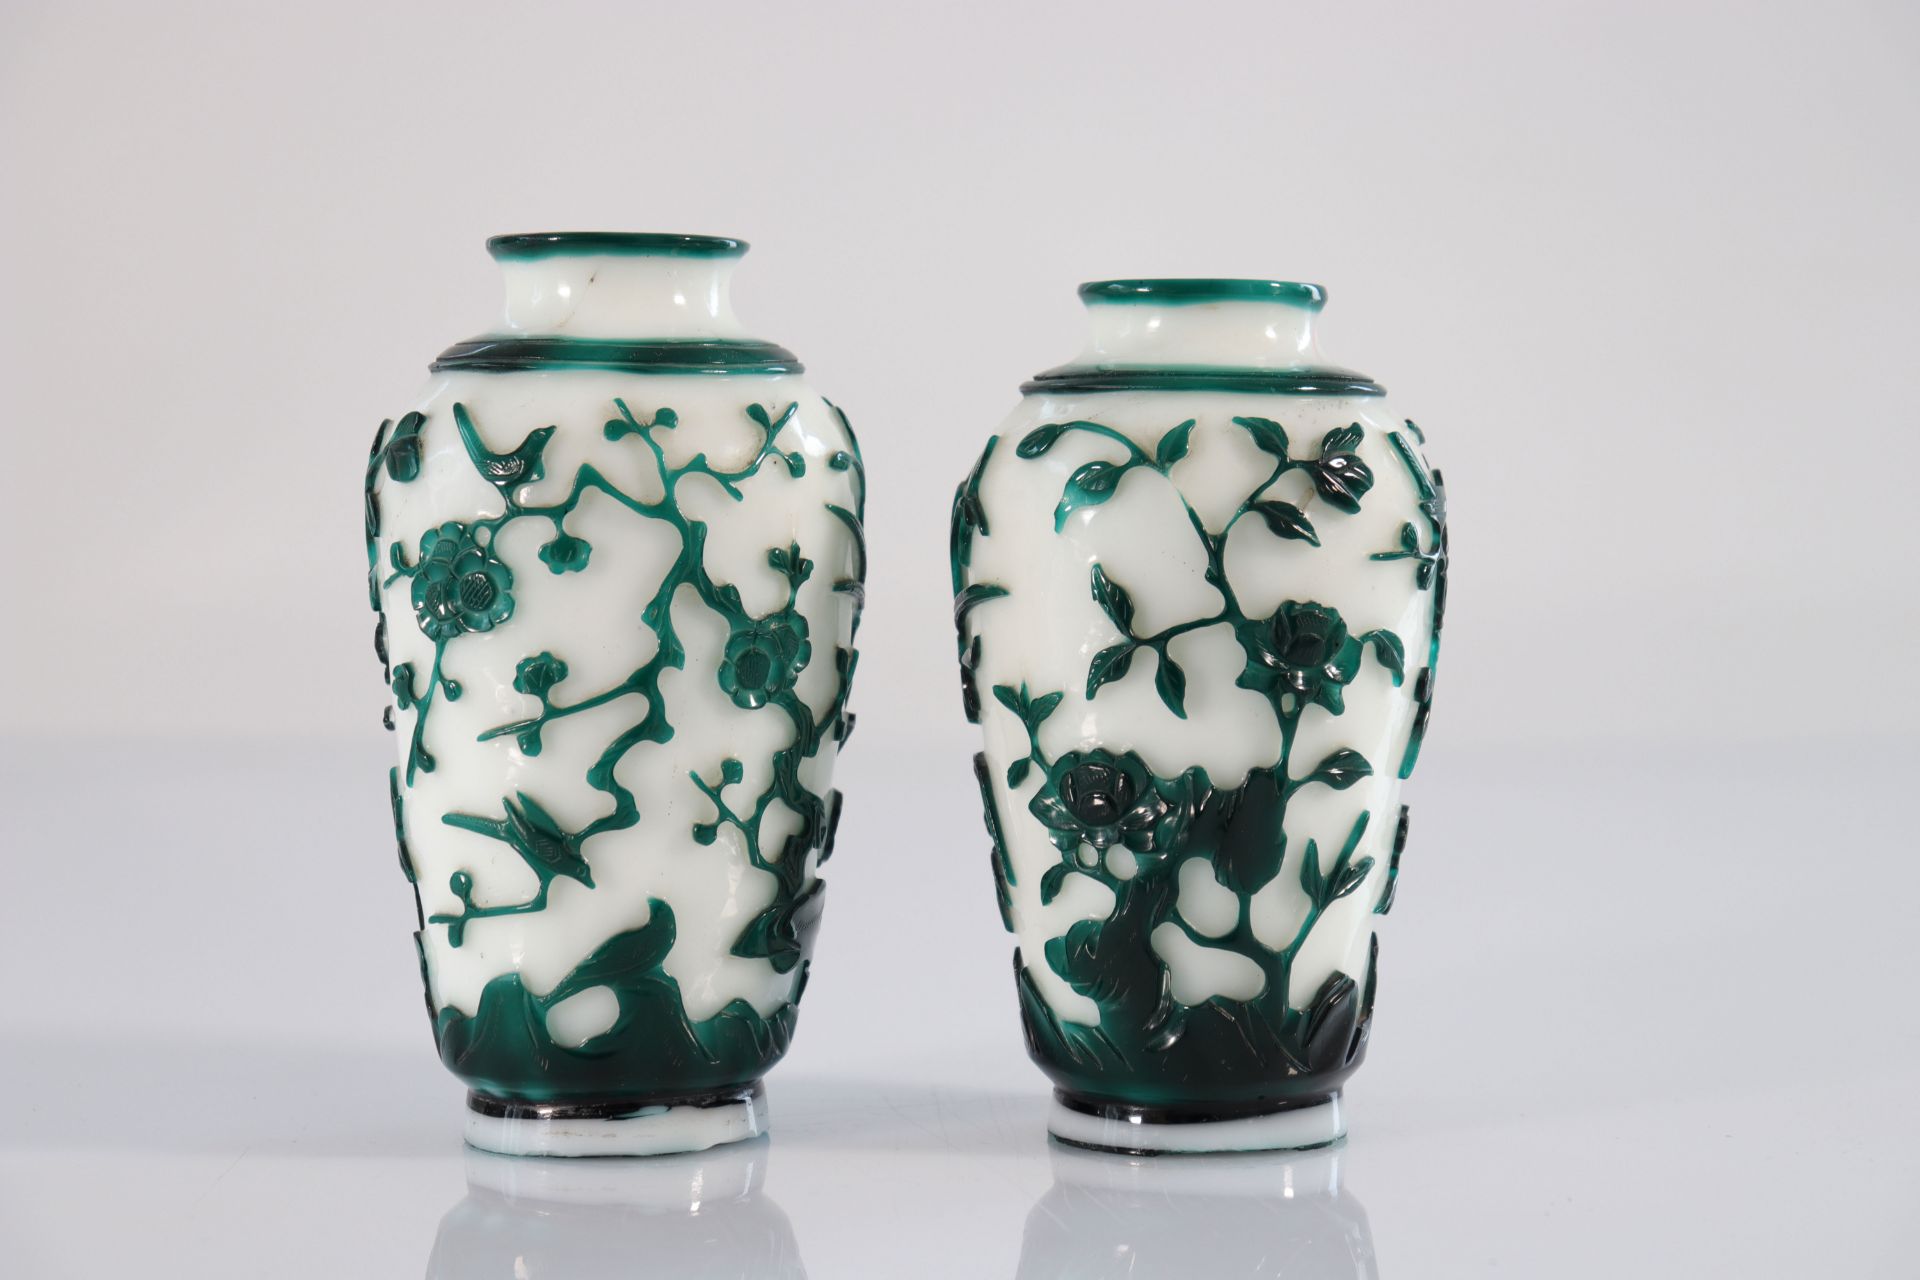 China pair of glass vases with floral decoration - Image 3 of 4